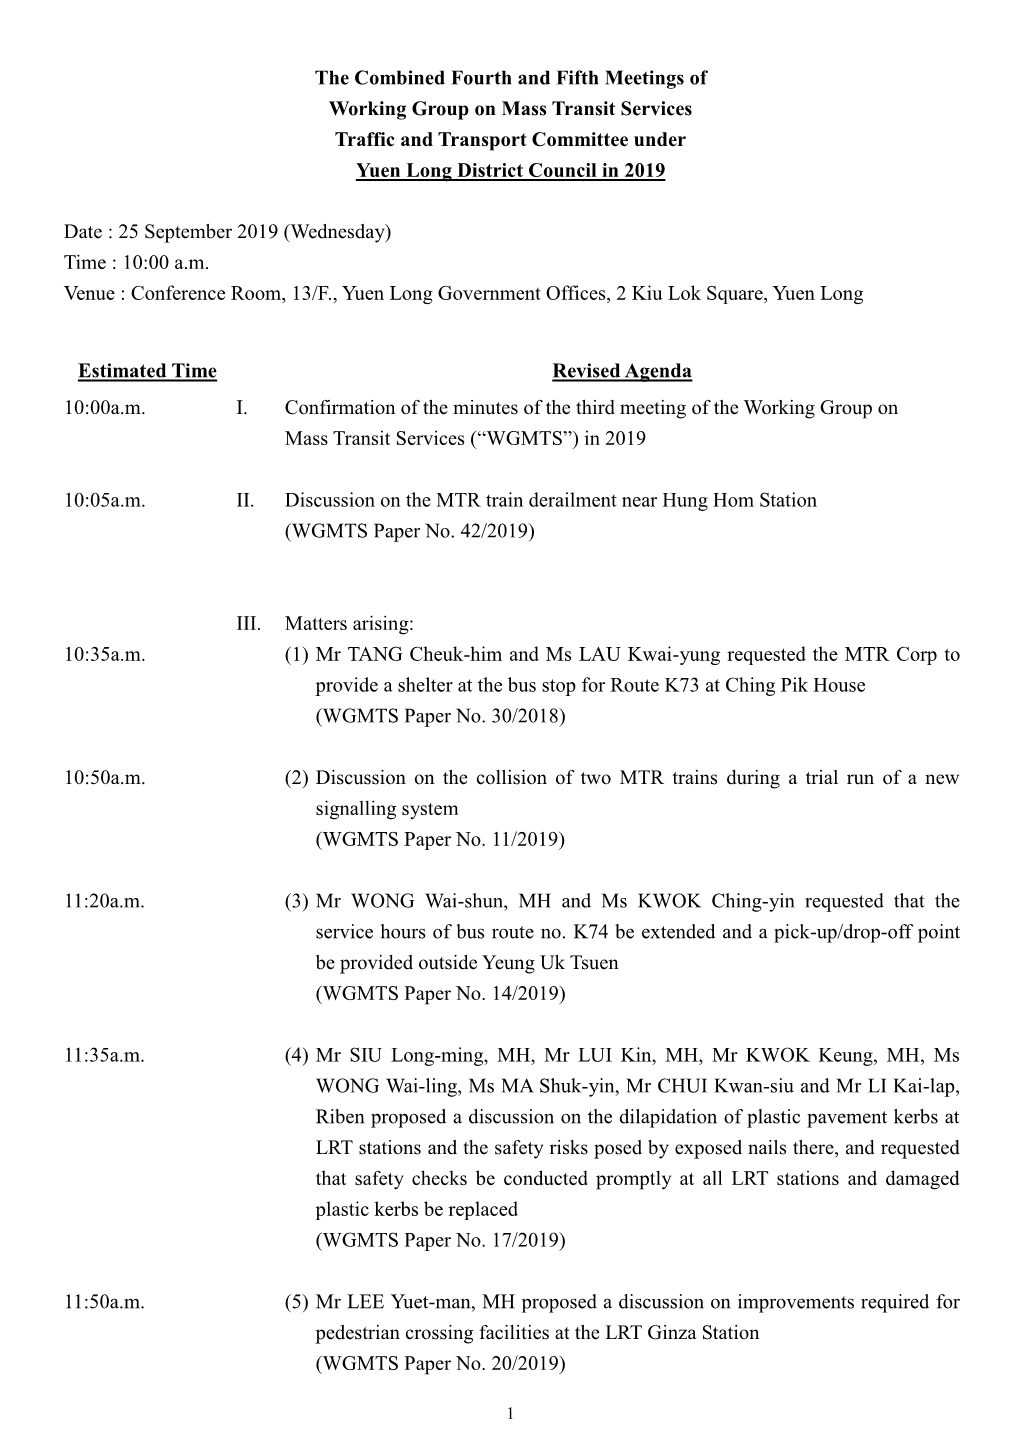 The Combined Fourth and Fifth Meetings of Working Group on Mass Transit Services Traffic and Transport Committee Under Yuen Long District Council in 2019